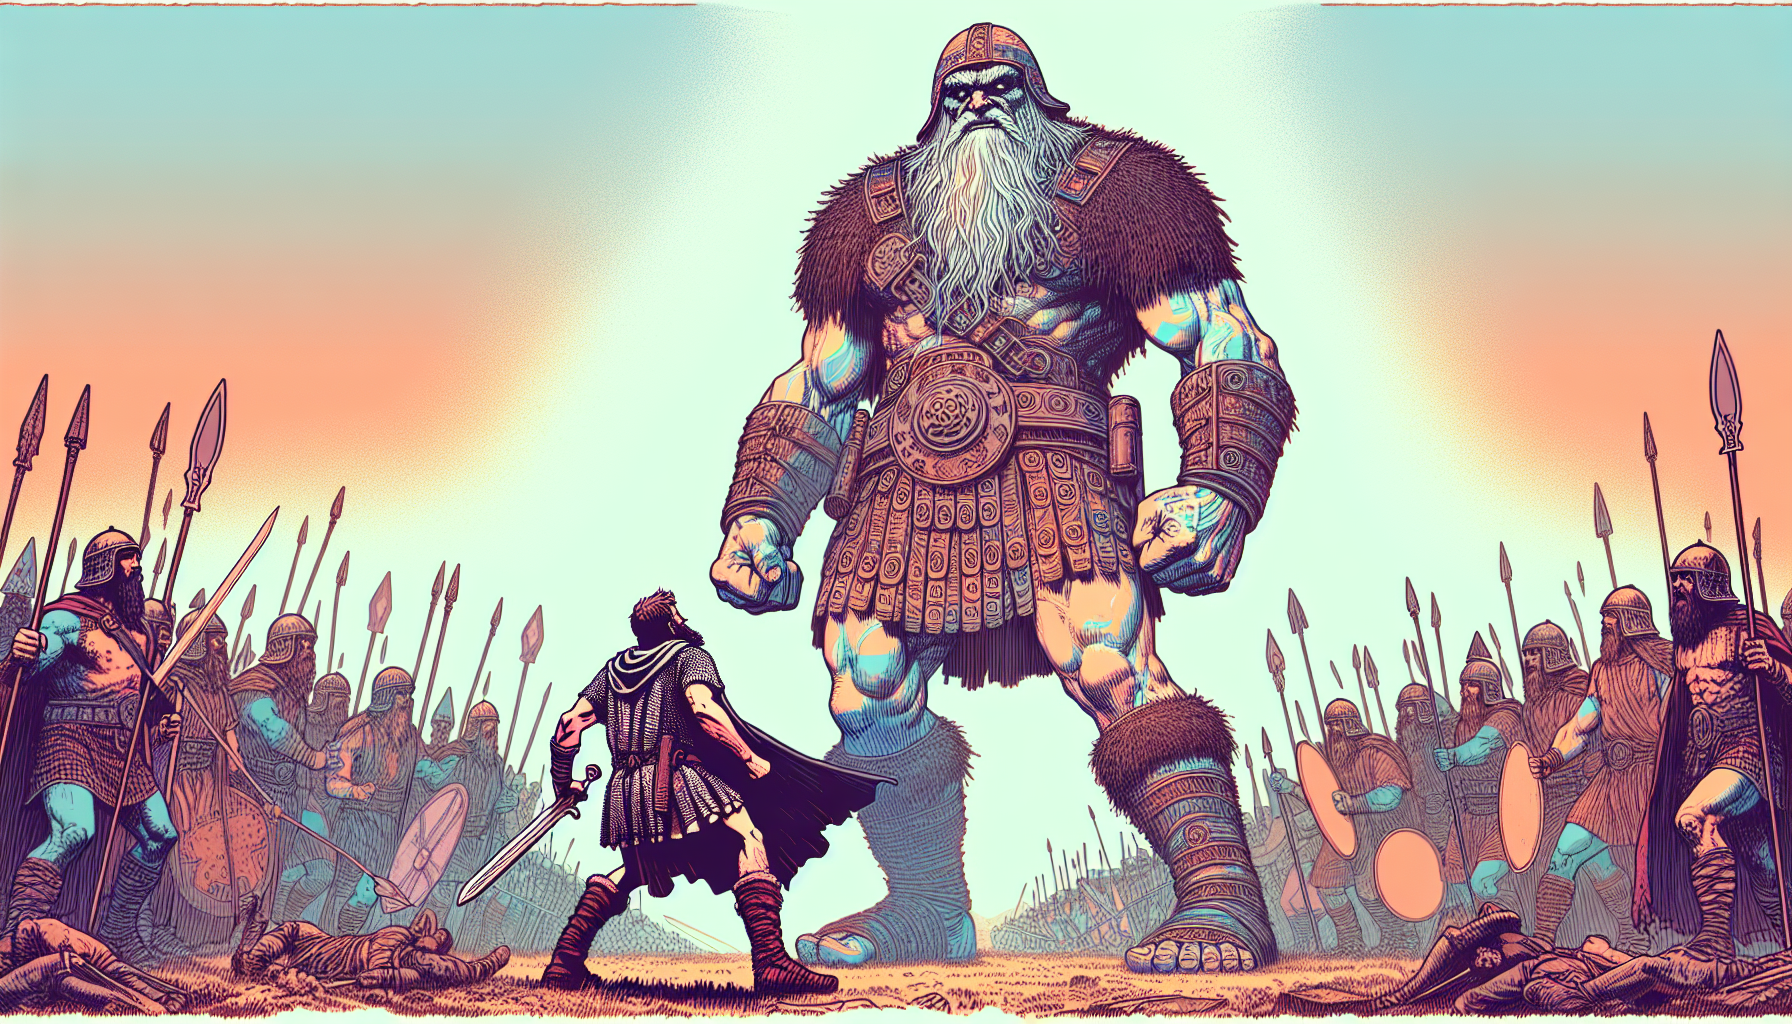 Create an illustration of the biblical figure Goliath, portrayed as an intimidating giant standing in the ancient battlefield facing off against David. Highlight Goliath's immense height and muscular